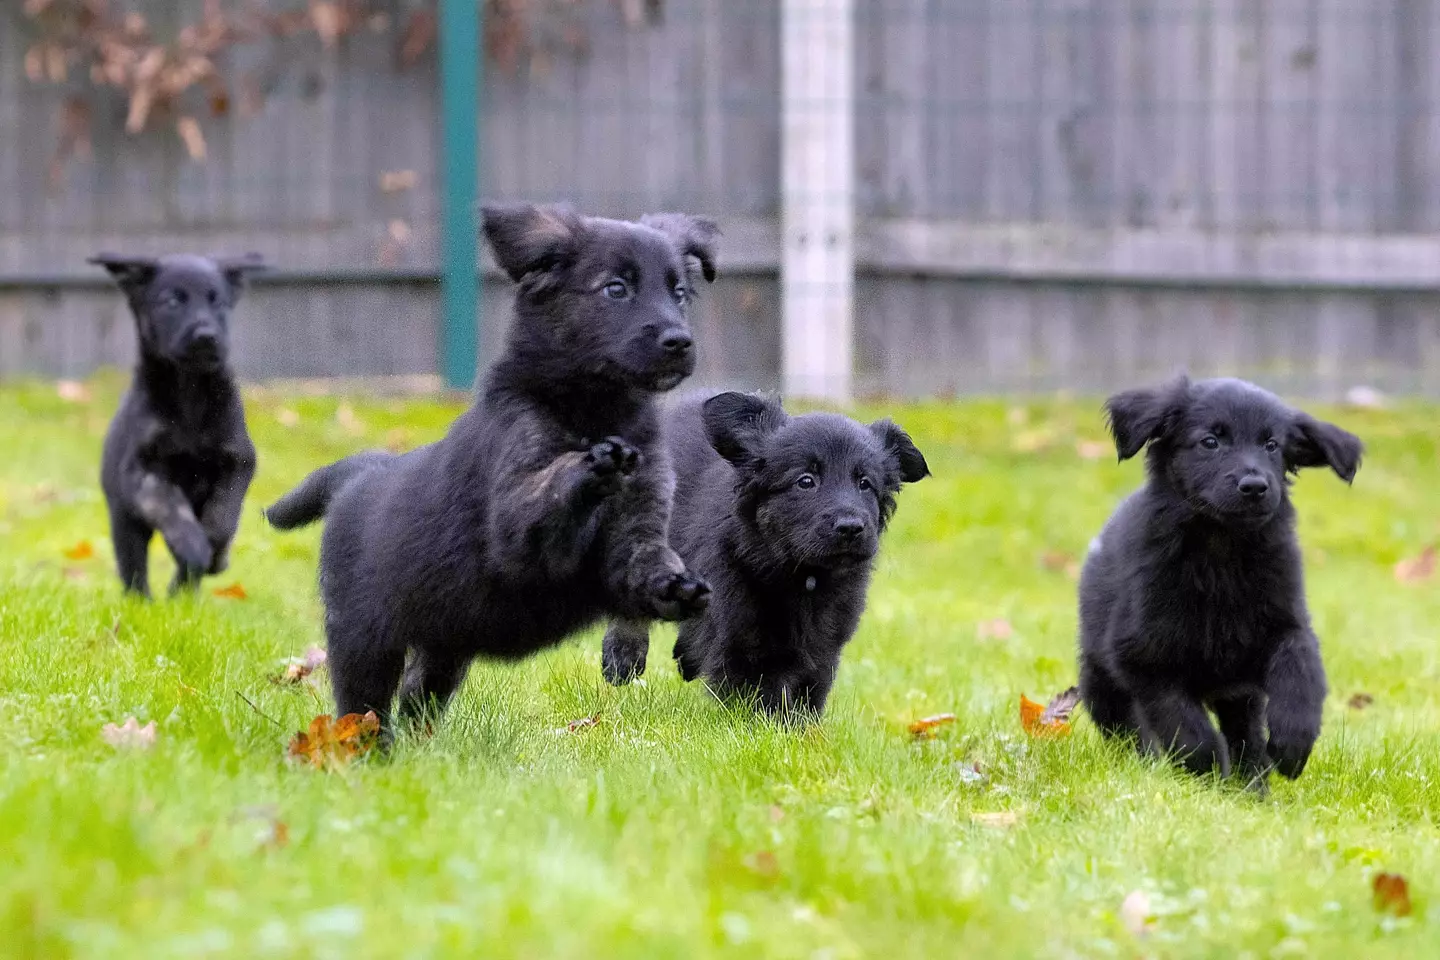 The puppies will be trained as guide dogs (